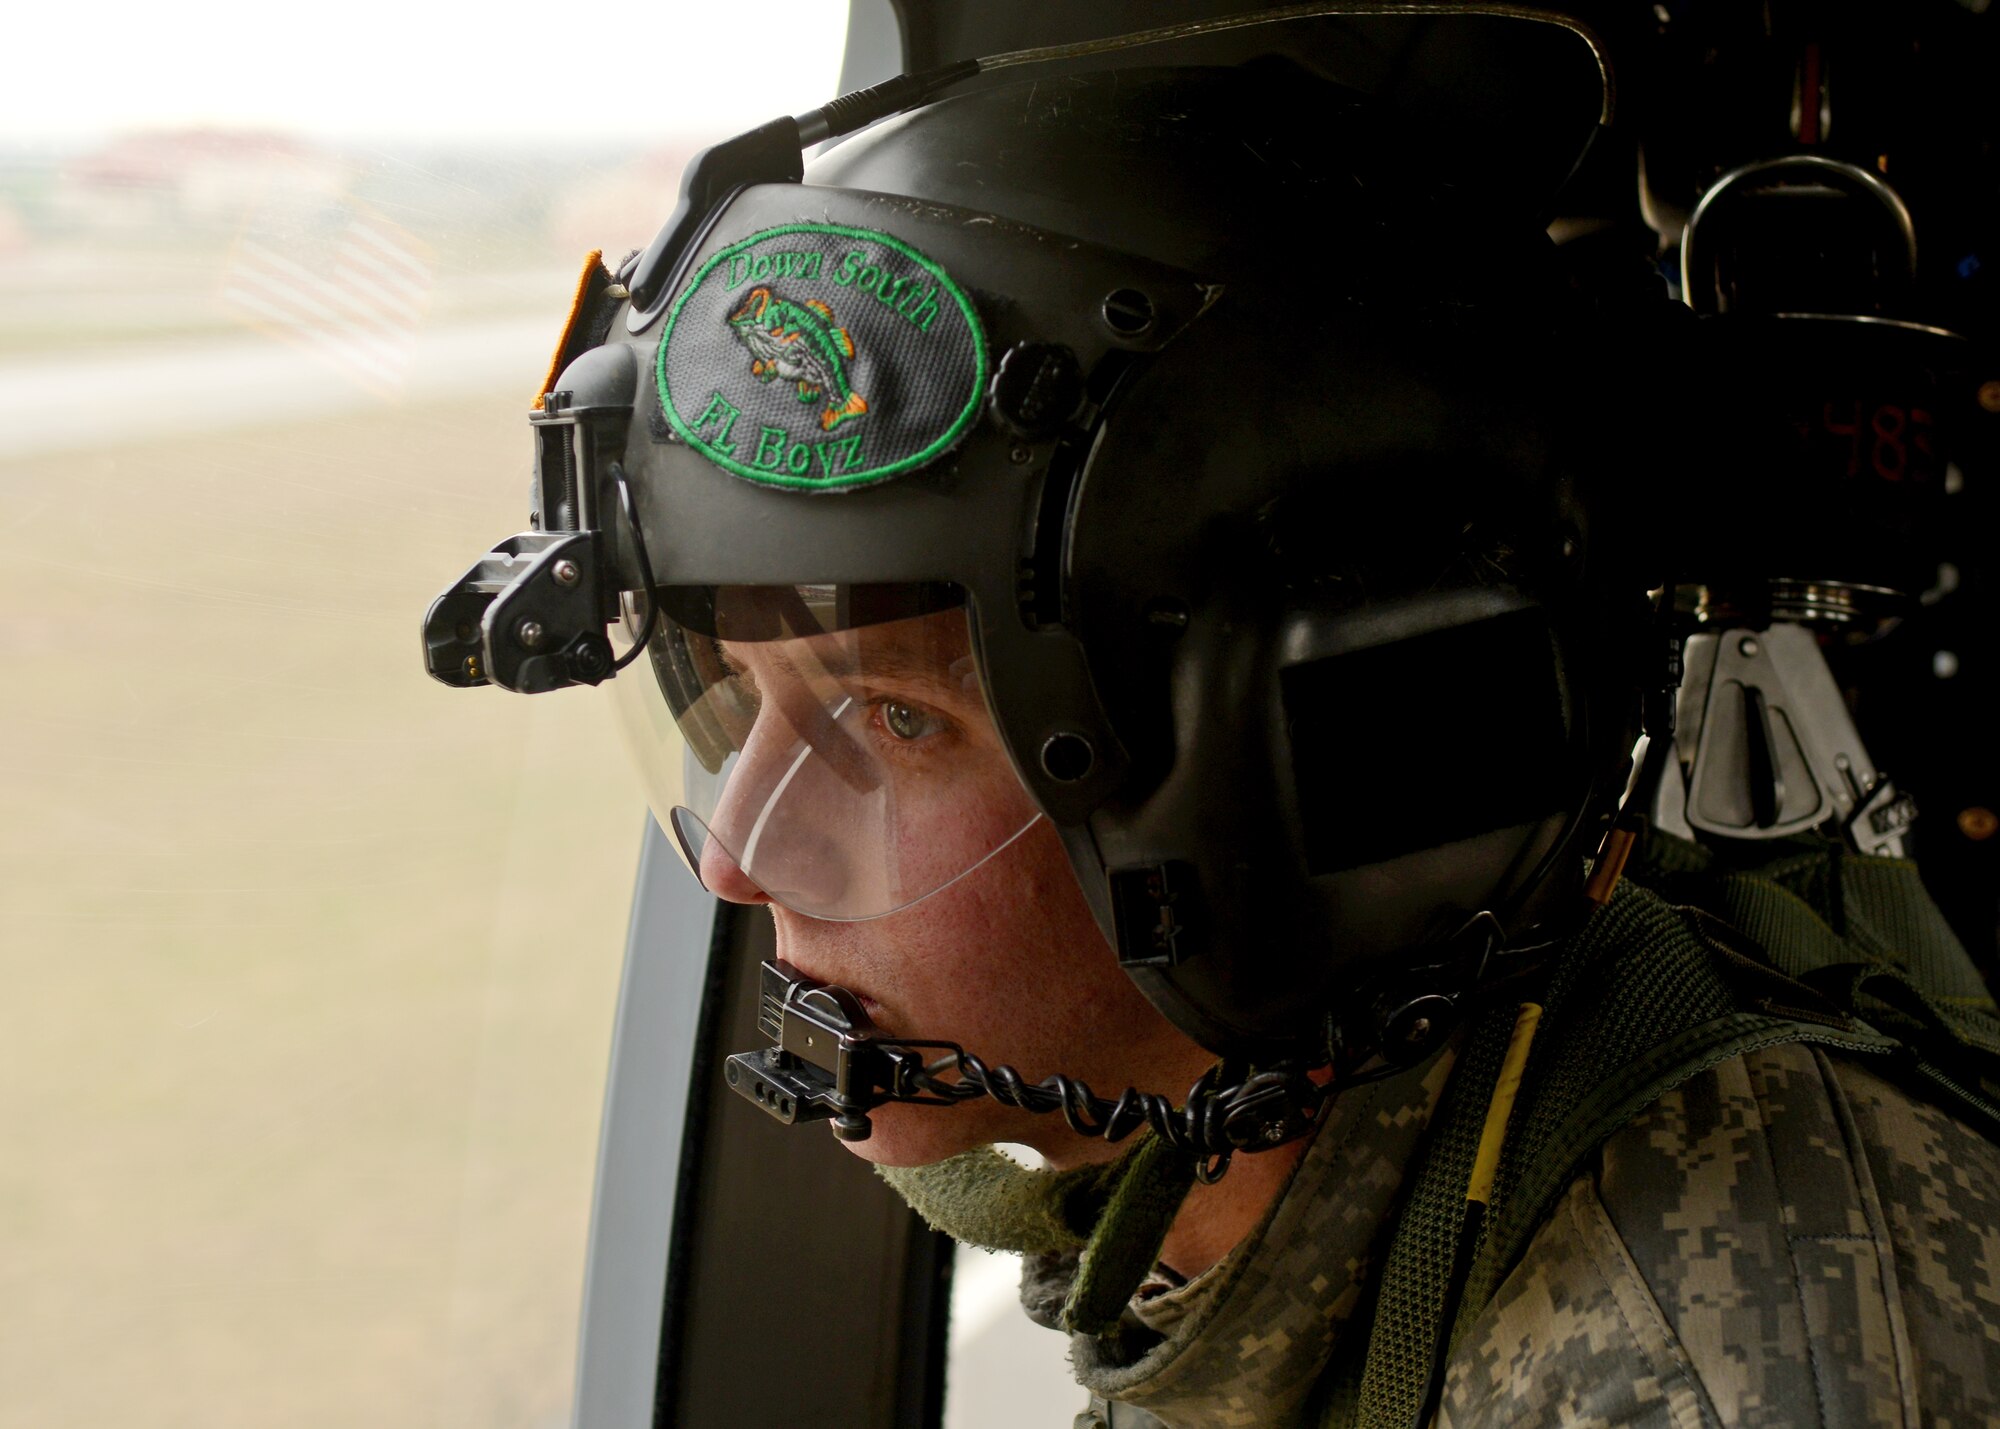 U.S. Army Sgt. Keith Dishman, 12th Combat Aviation Brigade crew chief, looks out the window of a UH-60 Black Hawk helicopter during a joint-service combat search and rescue training mission, Jan. 28, 2014, at Cellina Meduna, Italy. There were several aspects to the training mission to include close air support, Survival, Evasion, Resistance and Escape training for personnel on the ground and a search and rescue coordinated with a U.S. Army UH-60 Black Hawk helicopter crew extracting isolated pilots from “hostile” environments. (U.S. Air Force/Senior Airman Briana Jones)